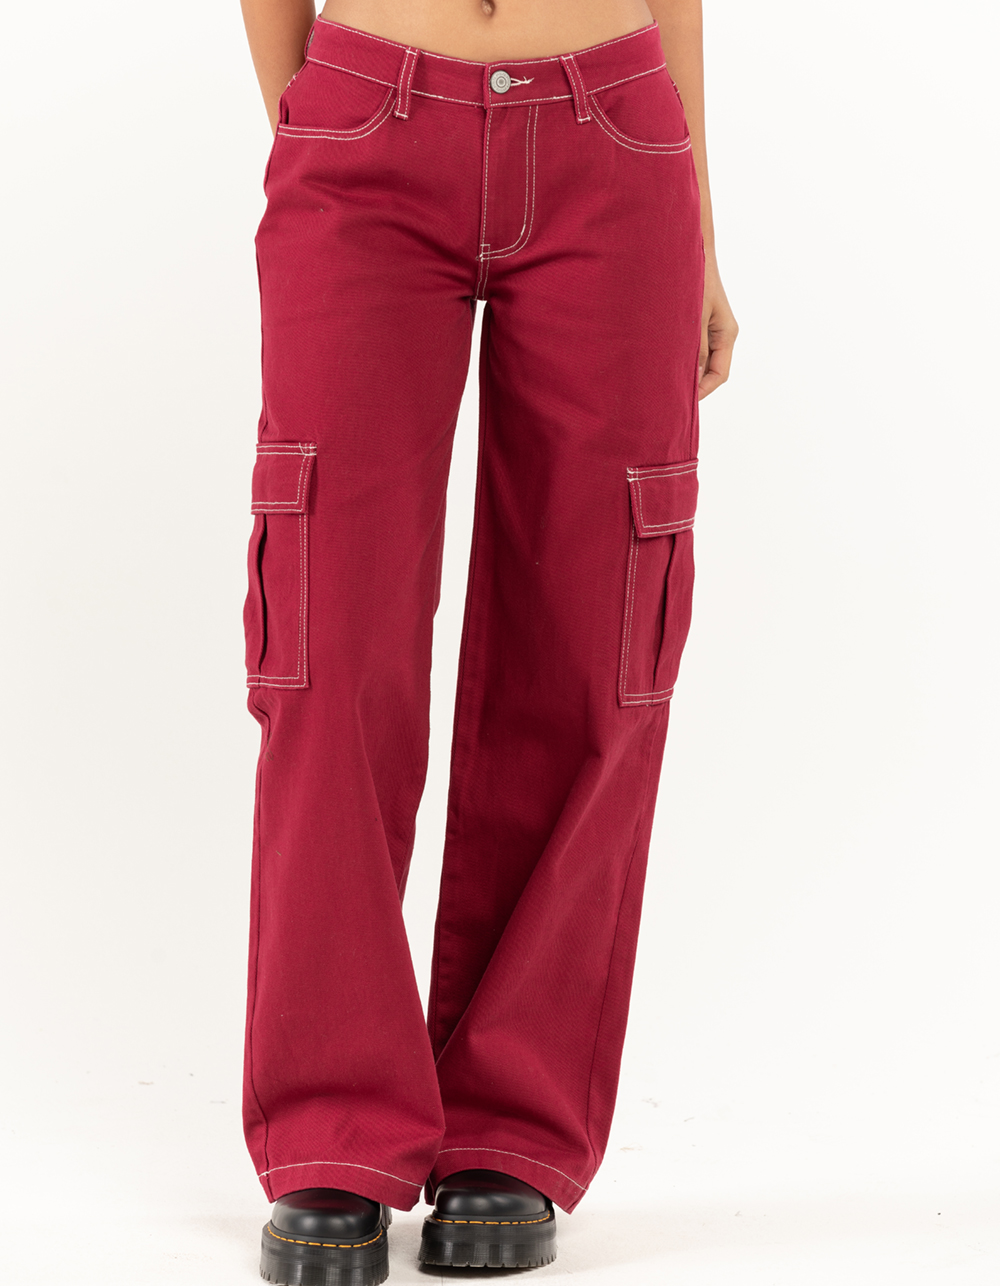 Buy Men Casual Cotton Cargo Pants  Red Online  699 from ShopClues